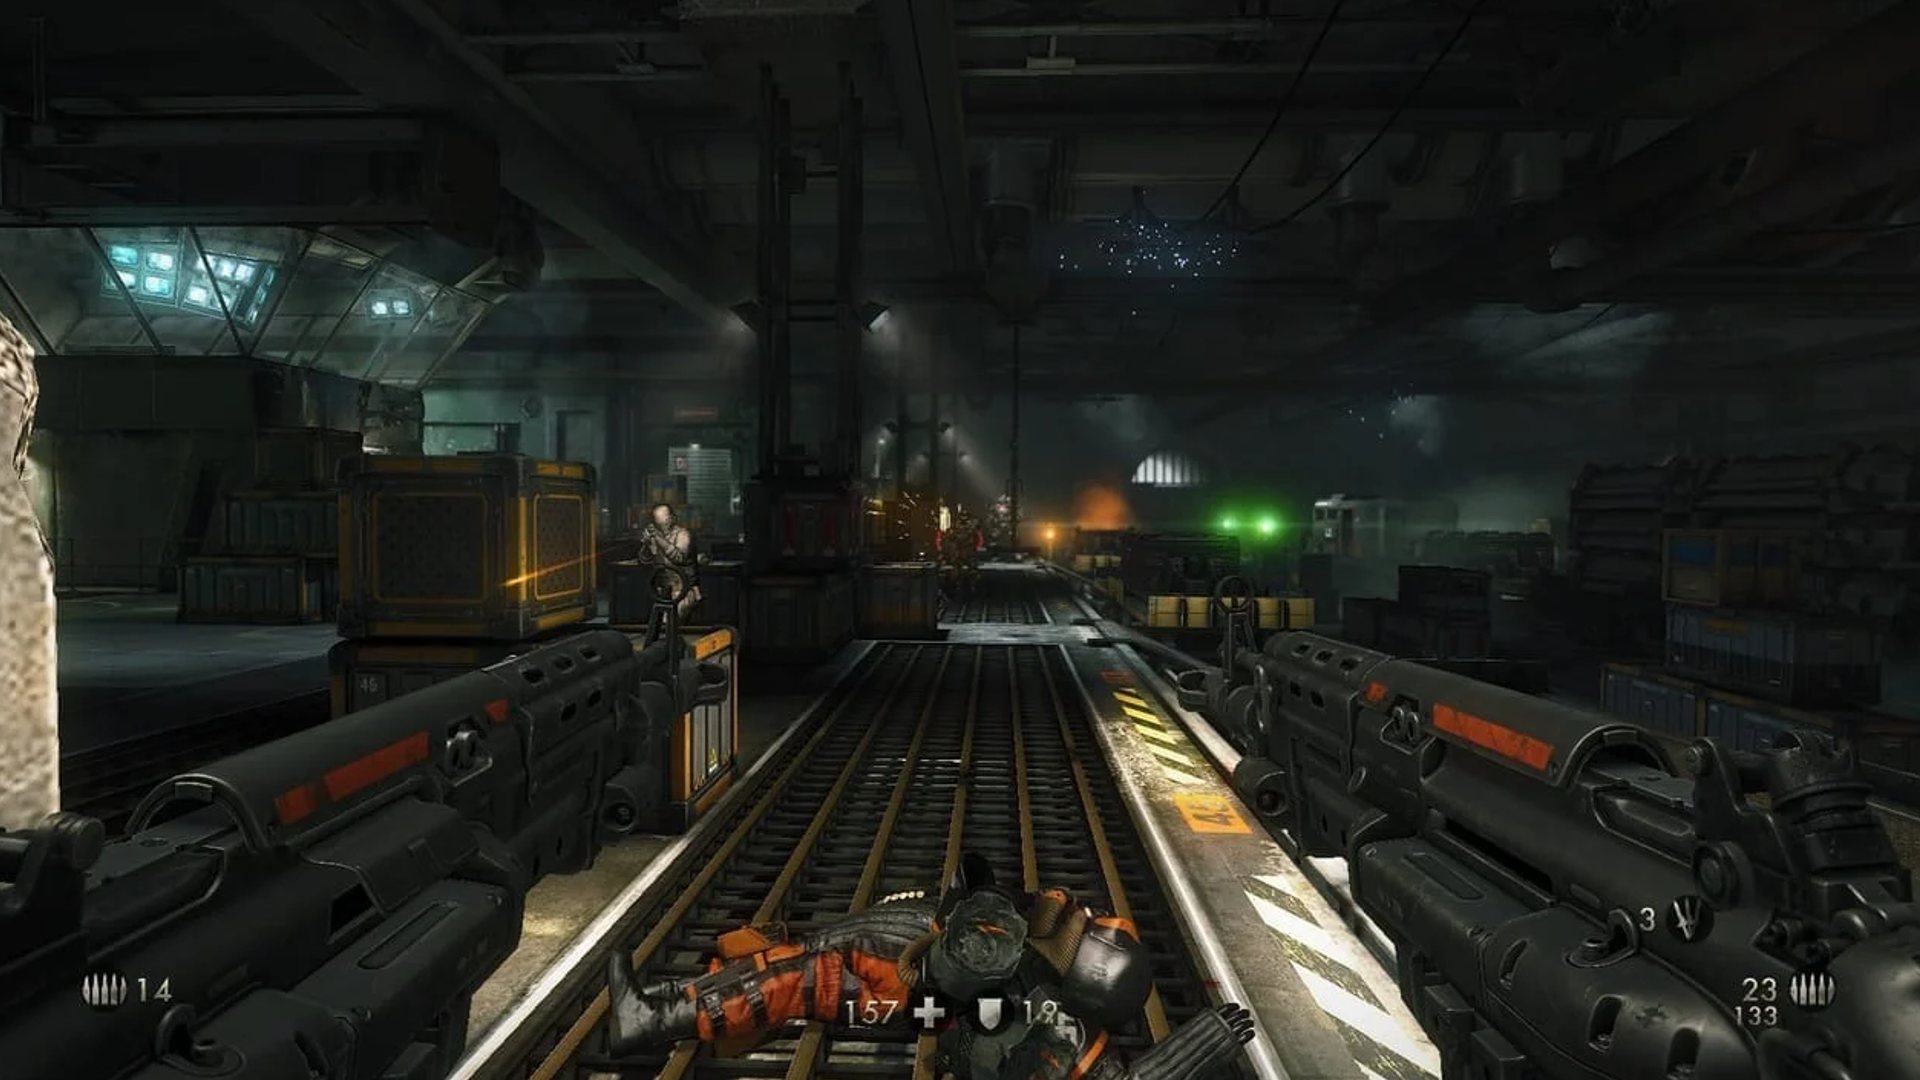 A player can be seen looking down a long corridor.